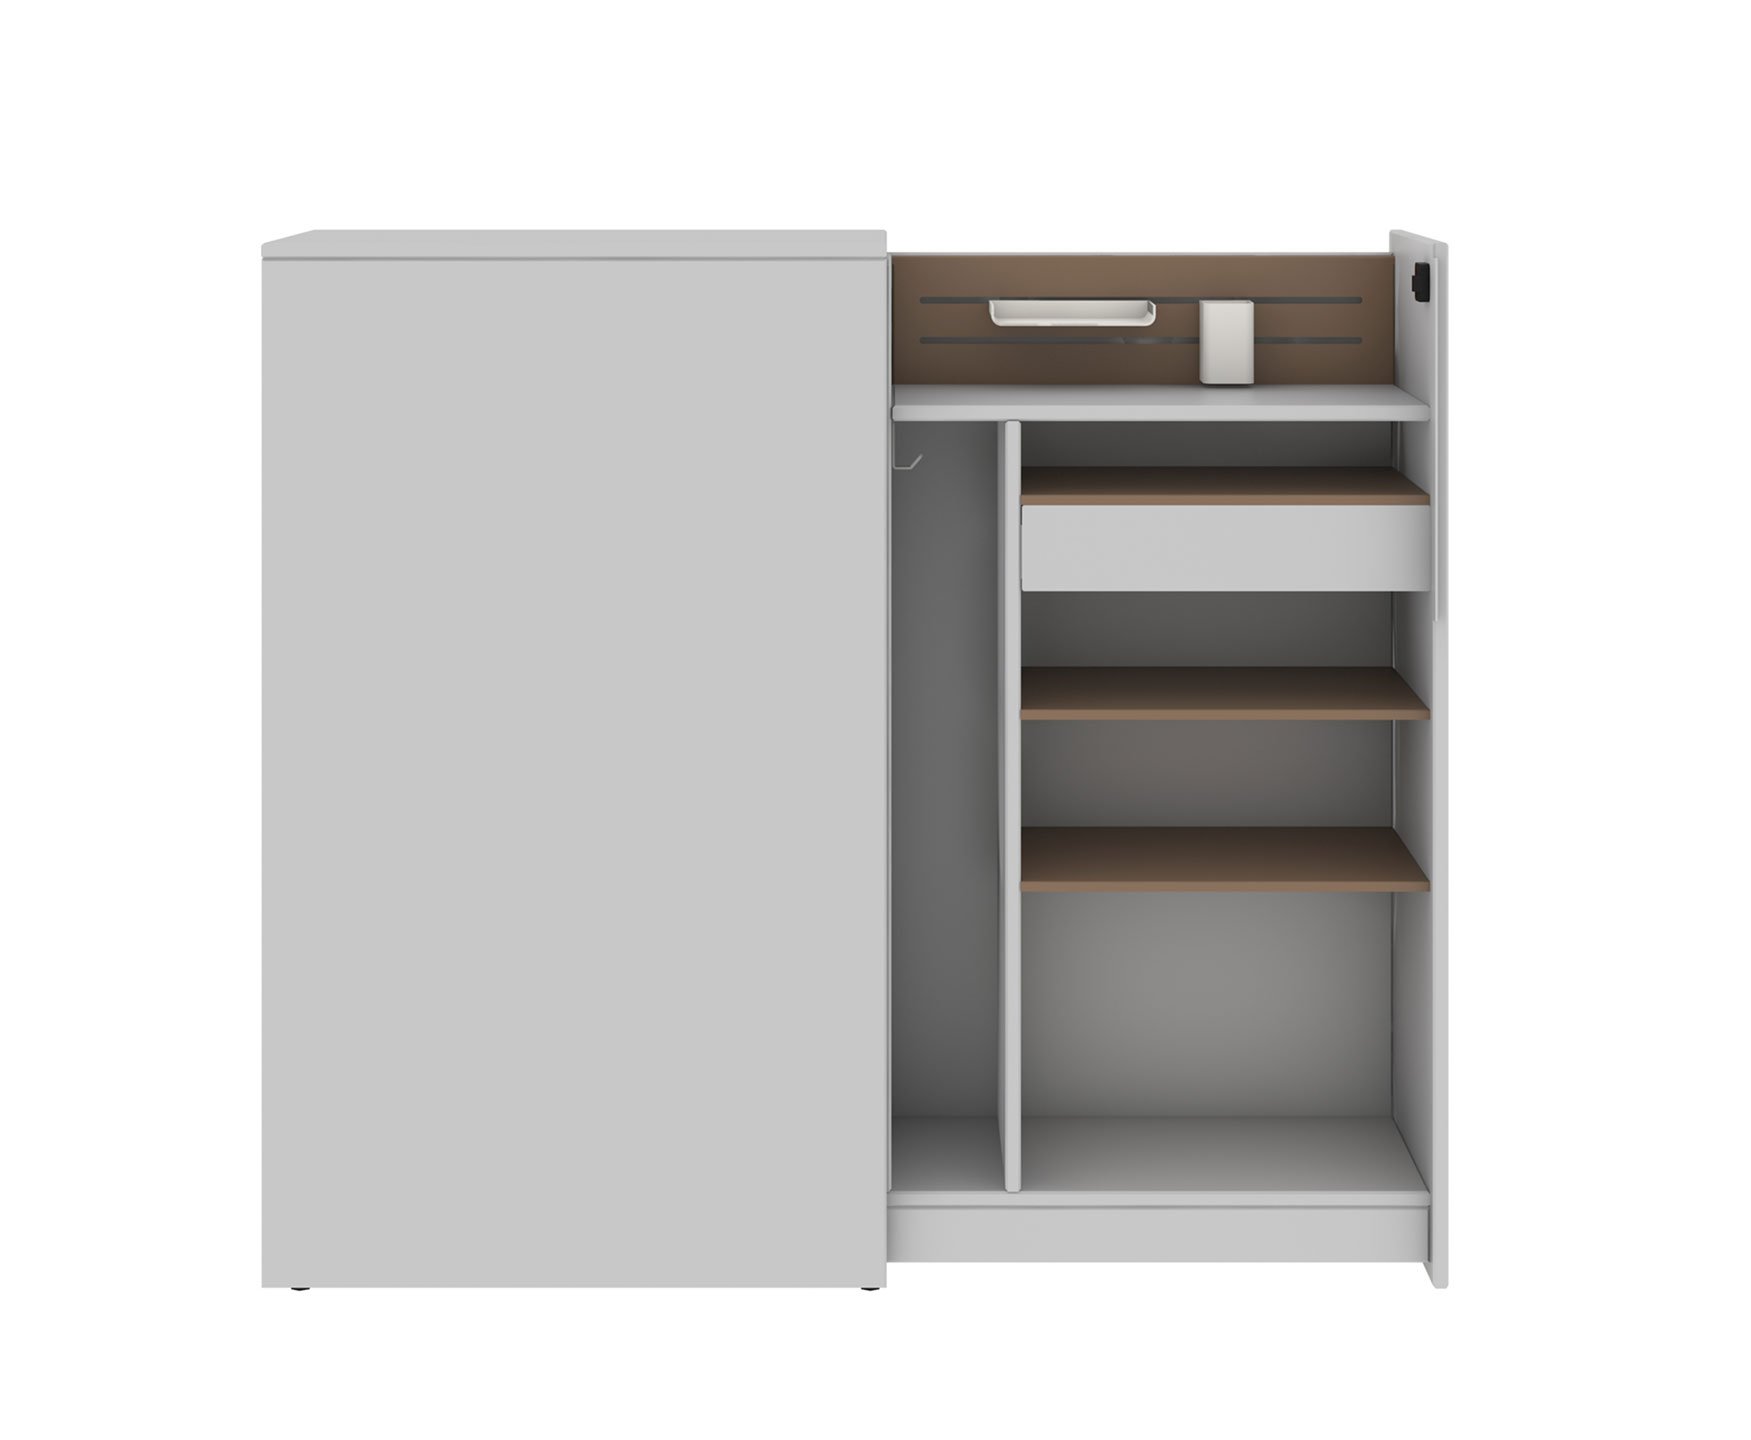 Beside Storage Pantry in gray with wooden shelves and lock sliding door